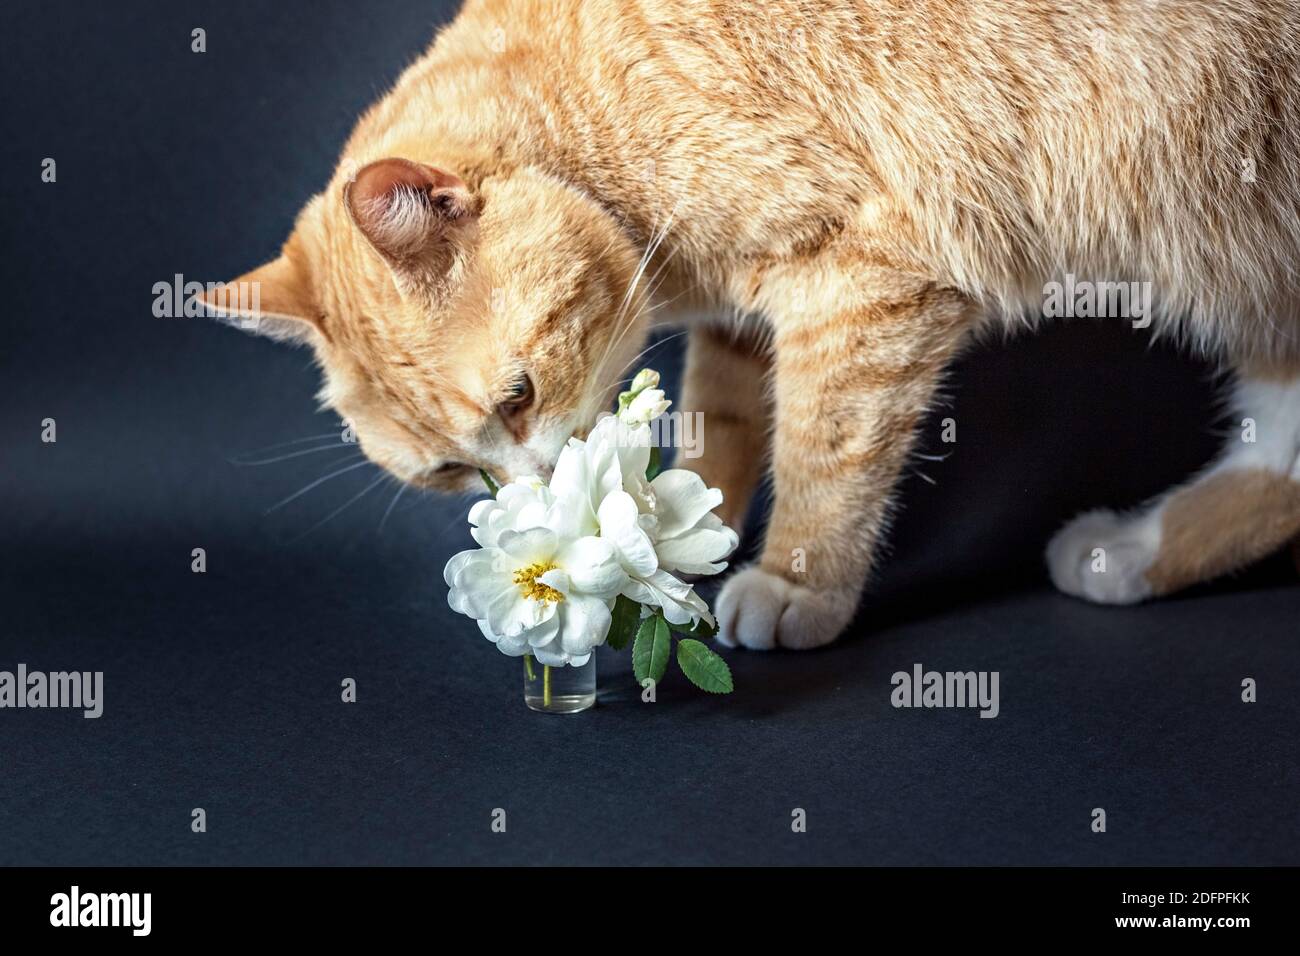 Red cat sniffing a vase of white flowers. Stock Photo